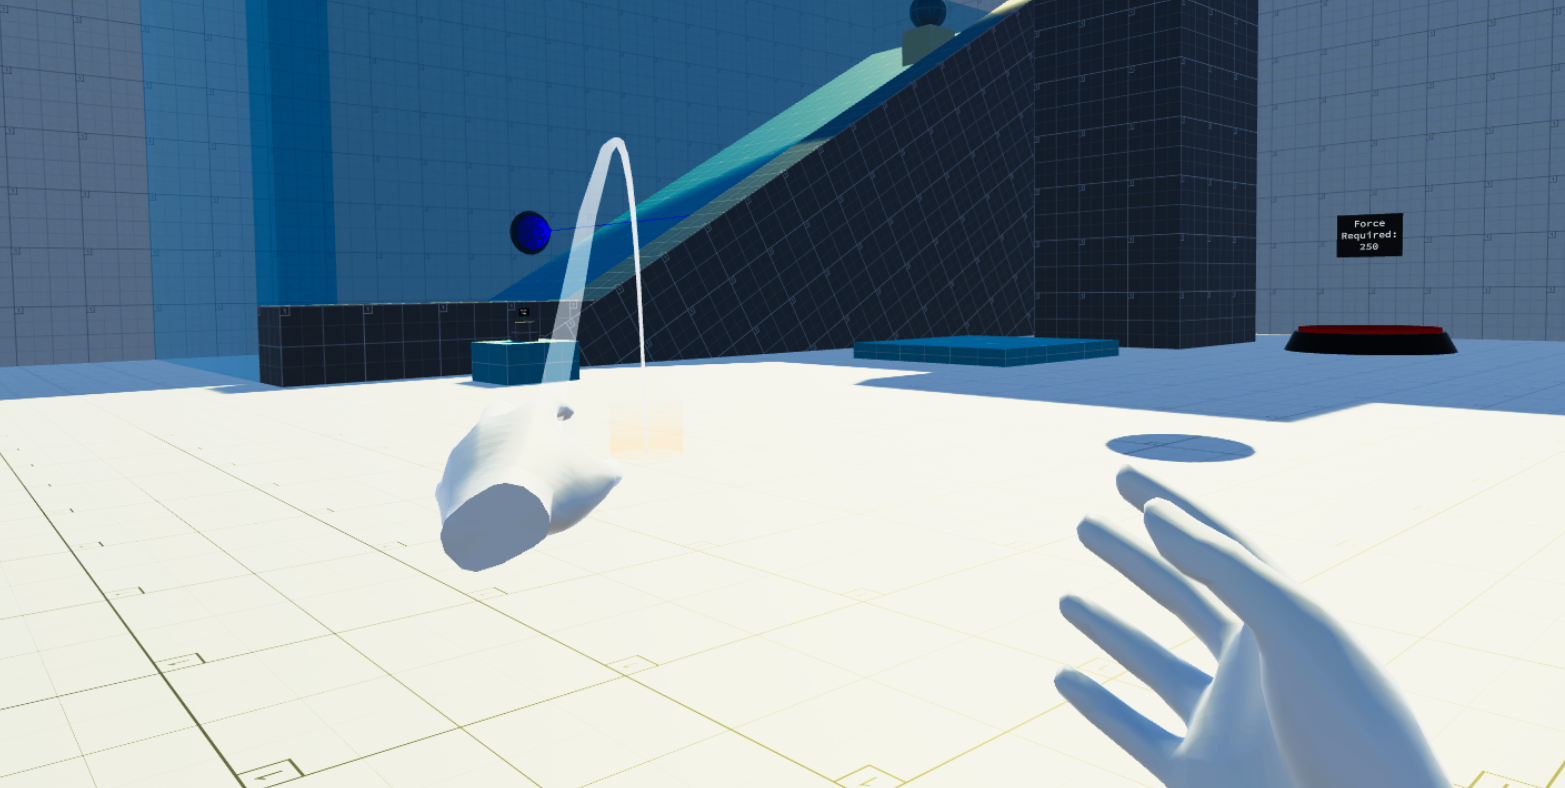 Screenshot from a Virtual Reality environment. A white, clinical looking room, with a black and blue ramp surrounded by glass. A ball is falling down the ramp. The player is attempting to move forward towards the ramp by using a white ray to aim where they will move to.